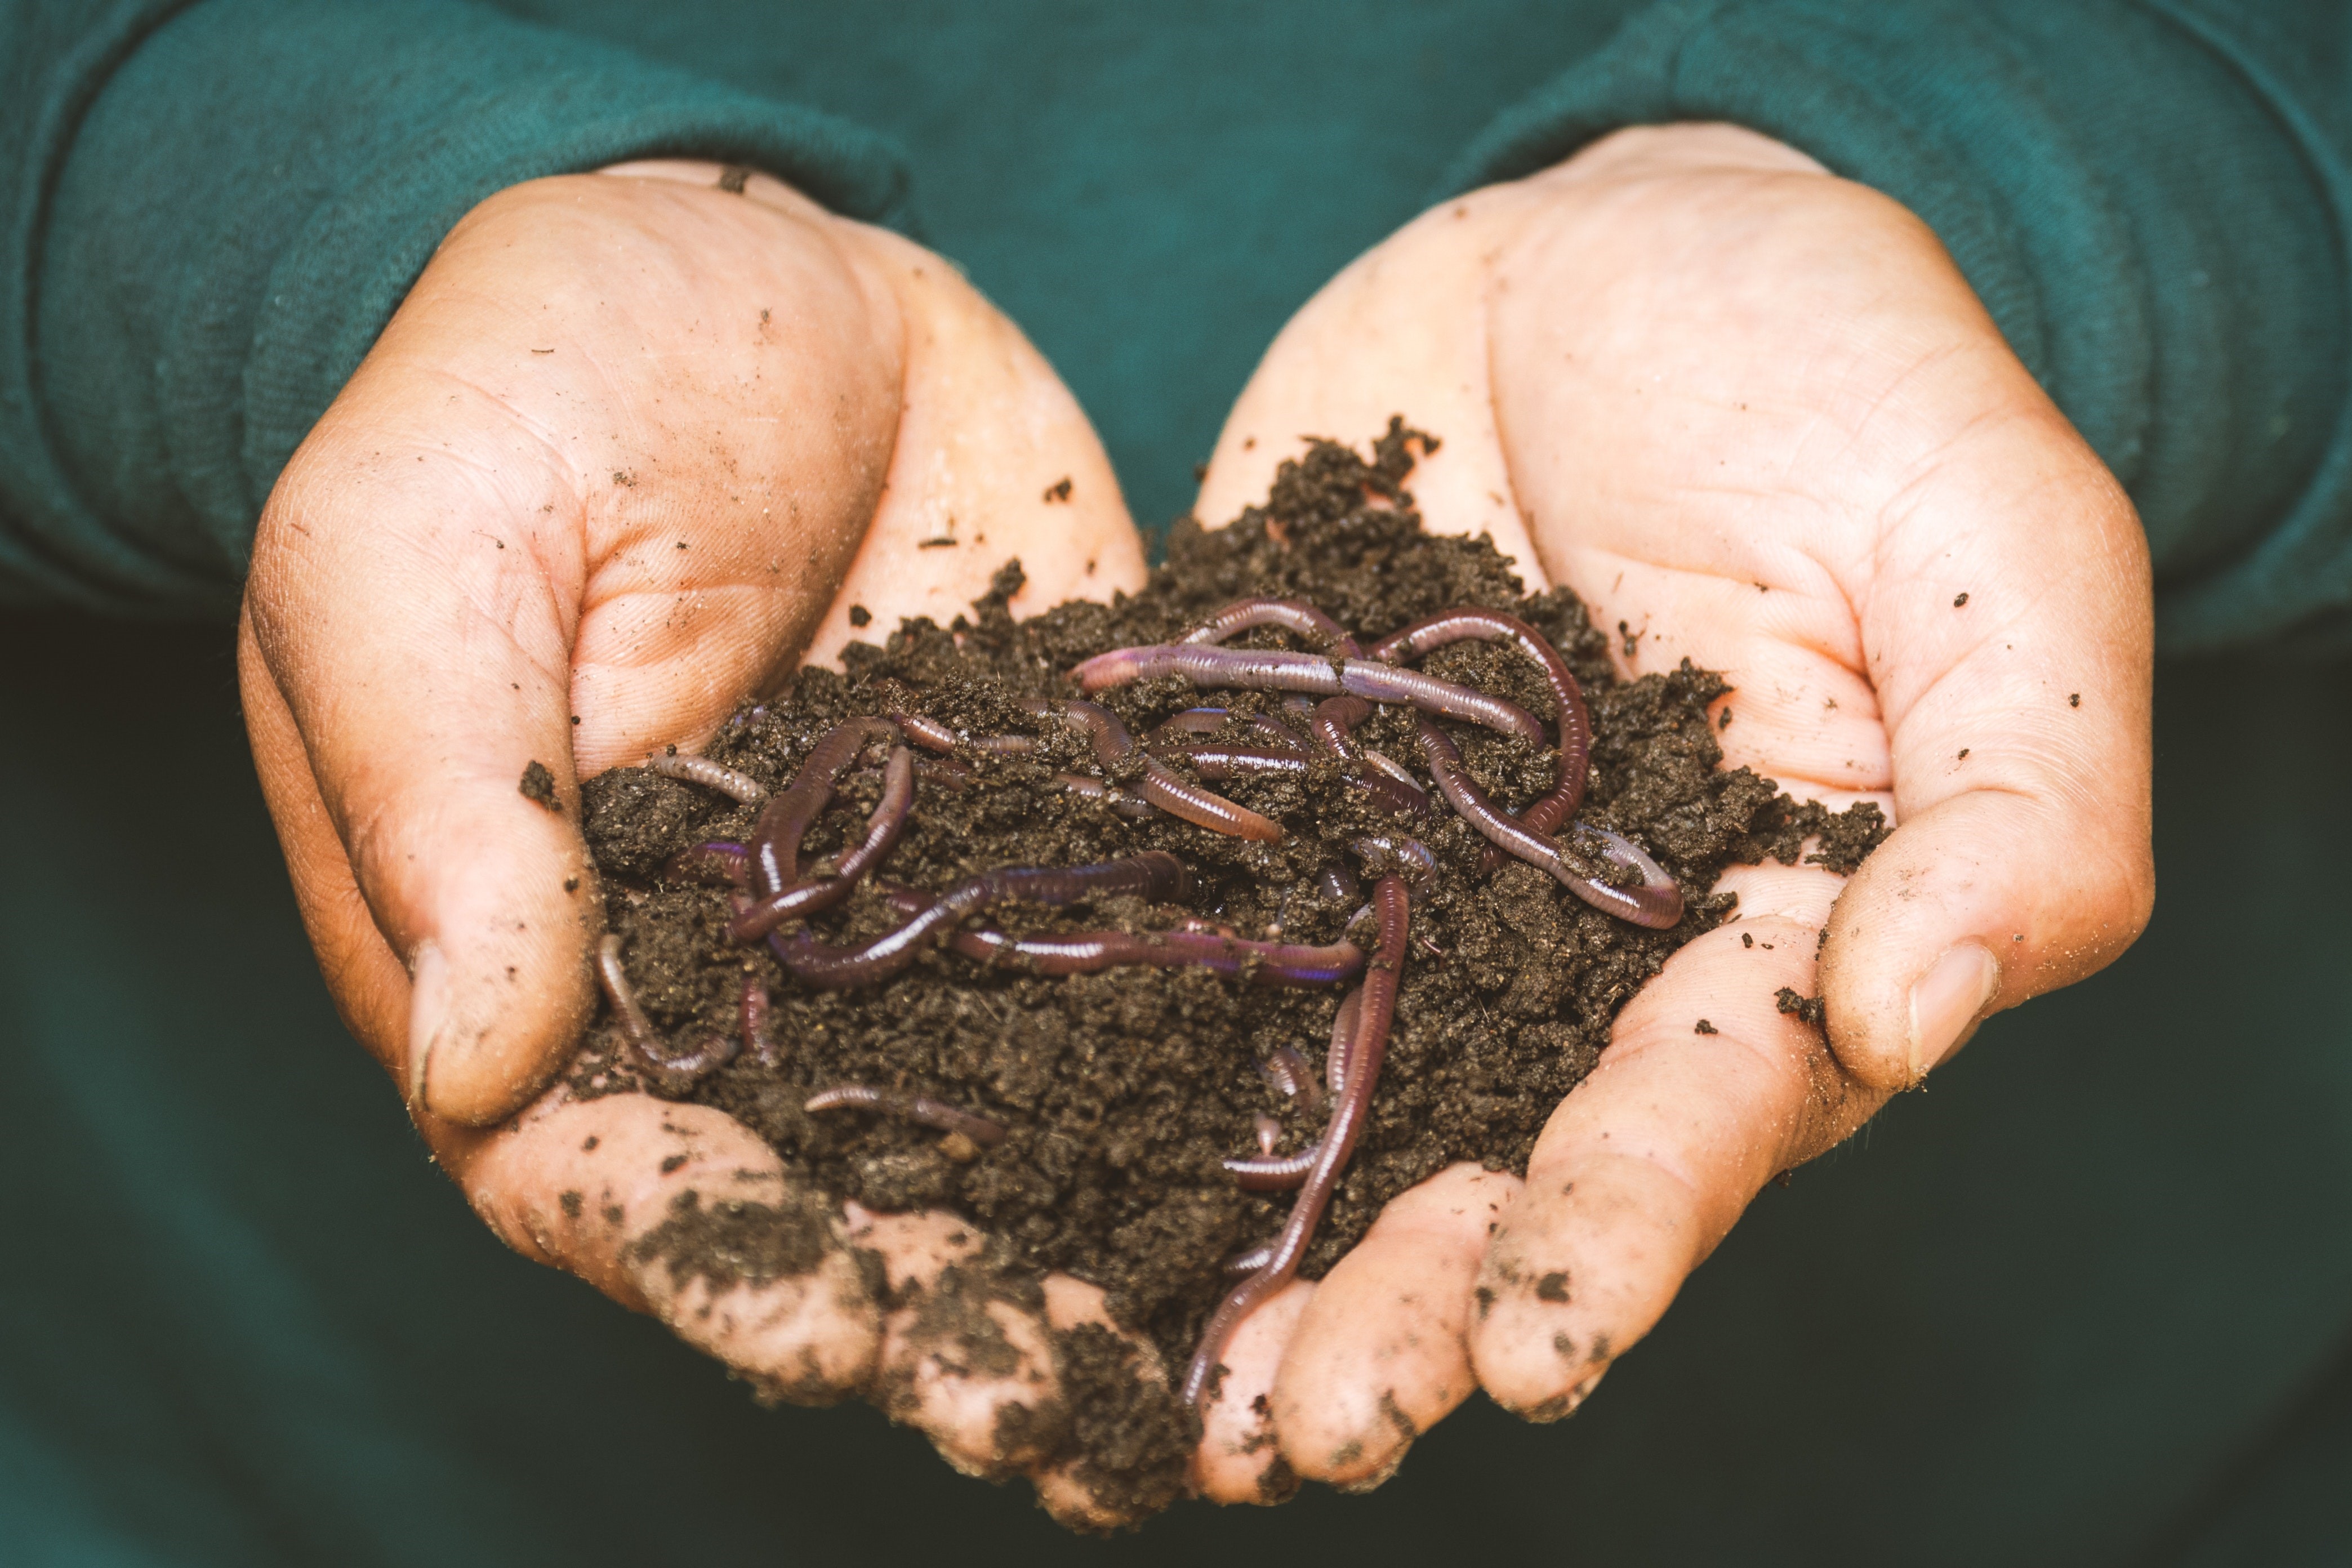 If you are interested in learning more and setting up your own compost bin or worm farm.